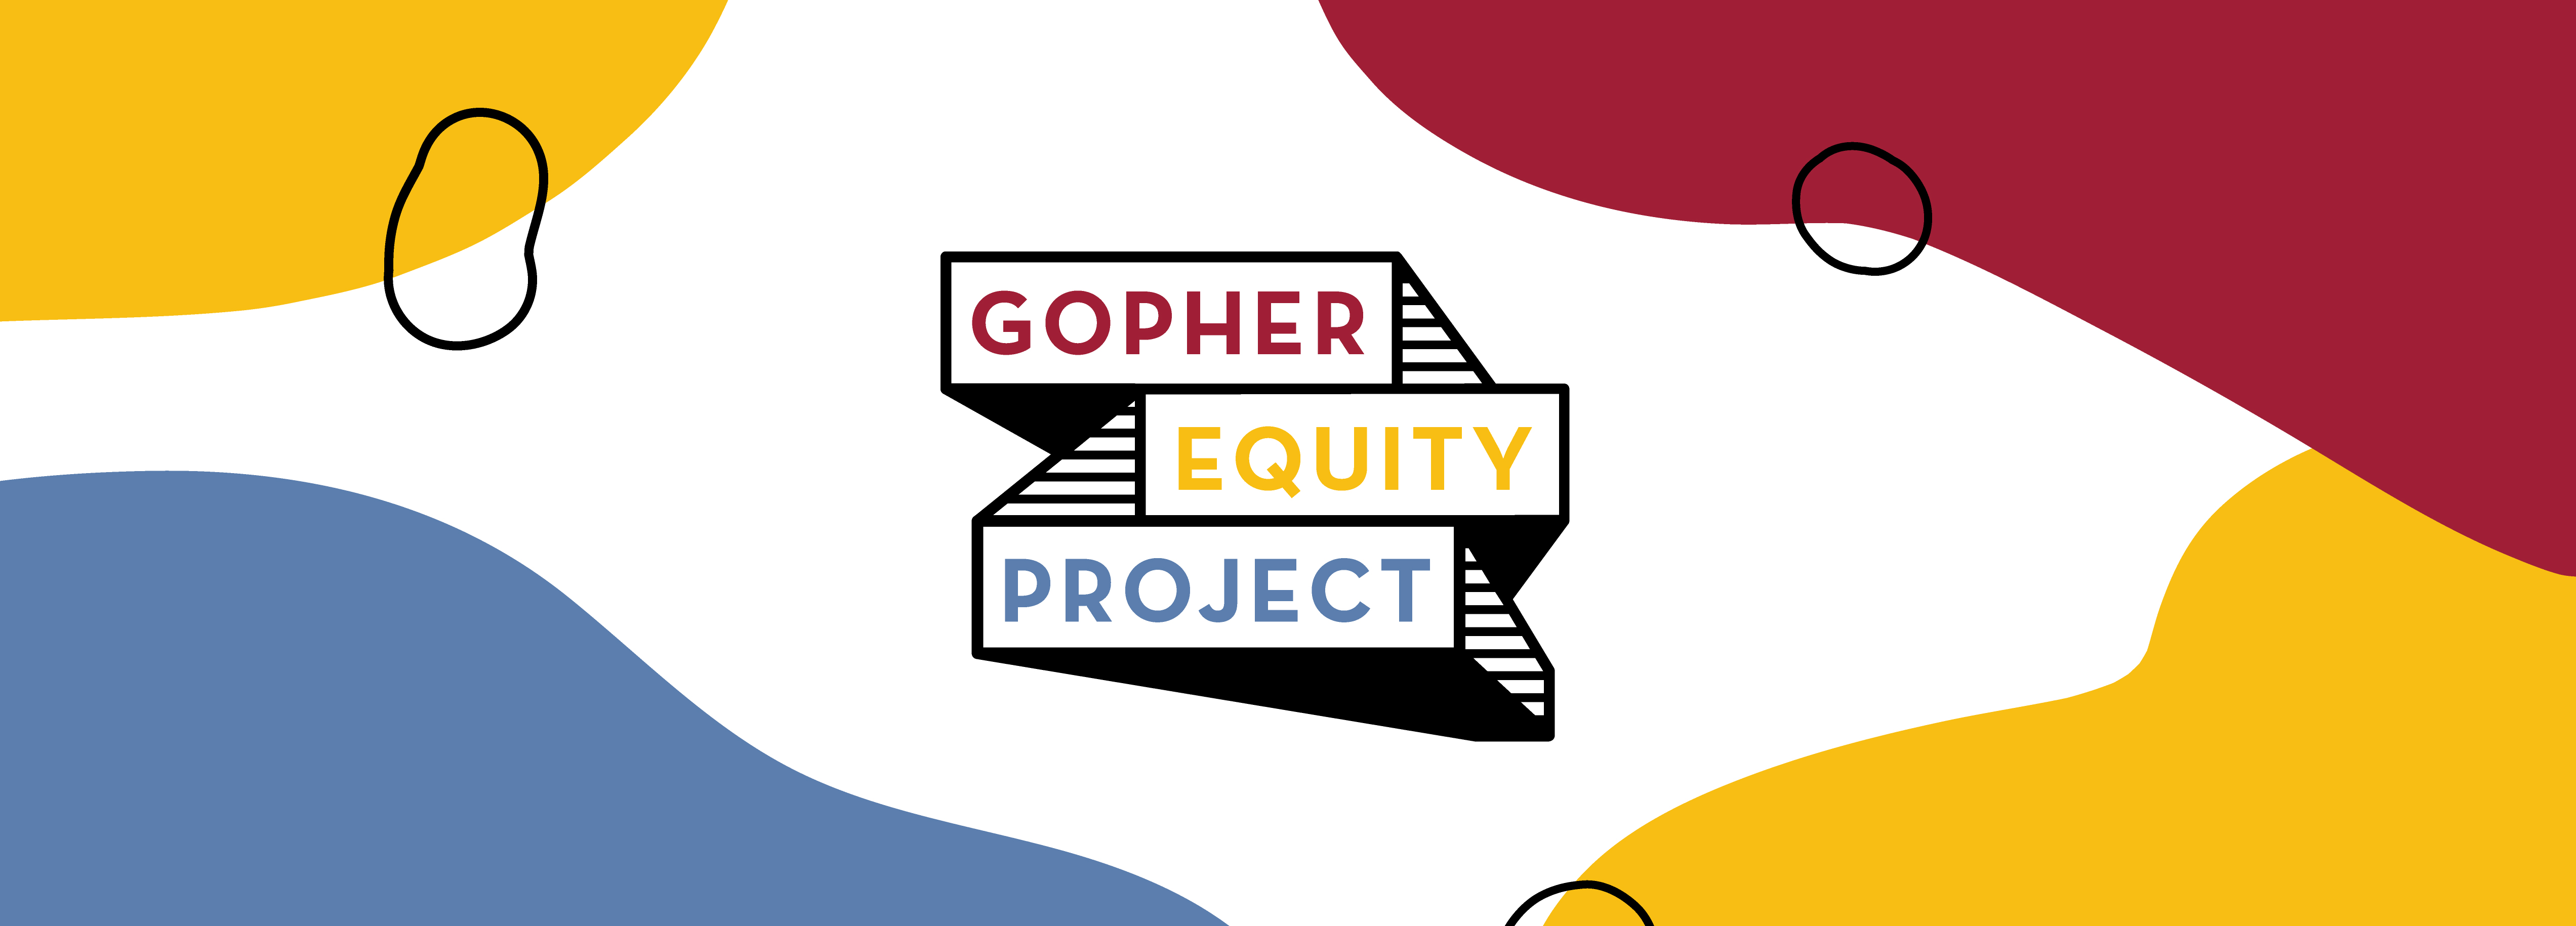 Gopher Equity Project